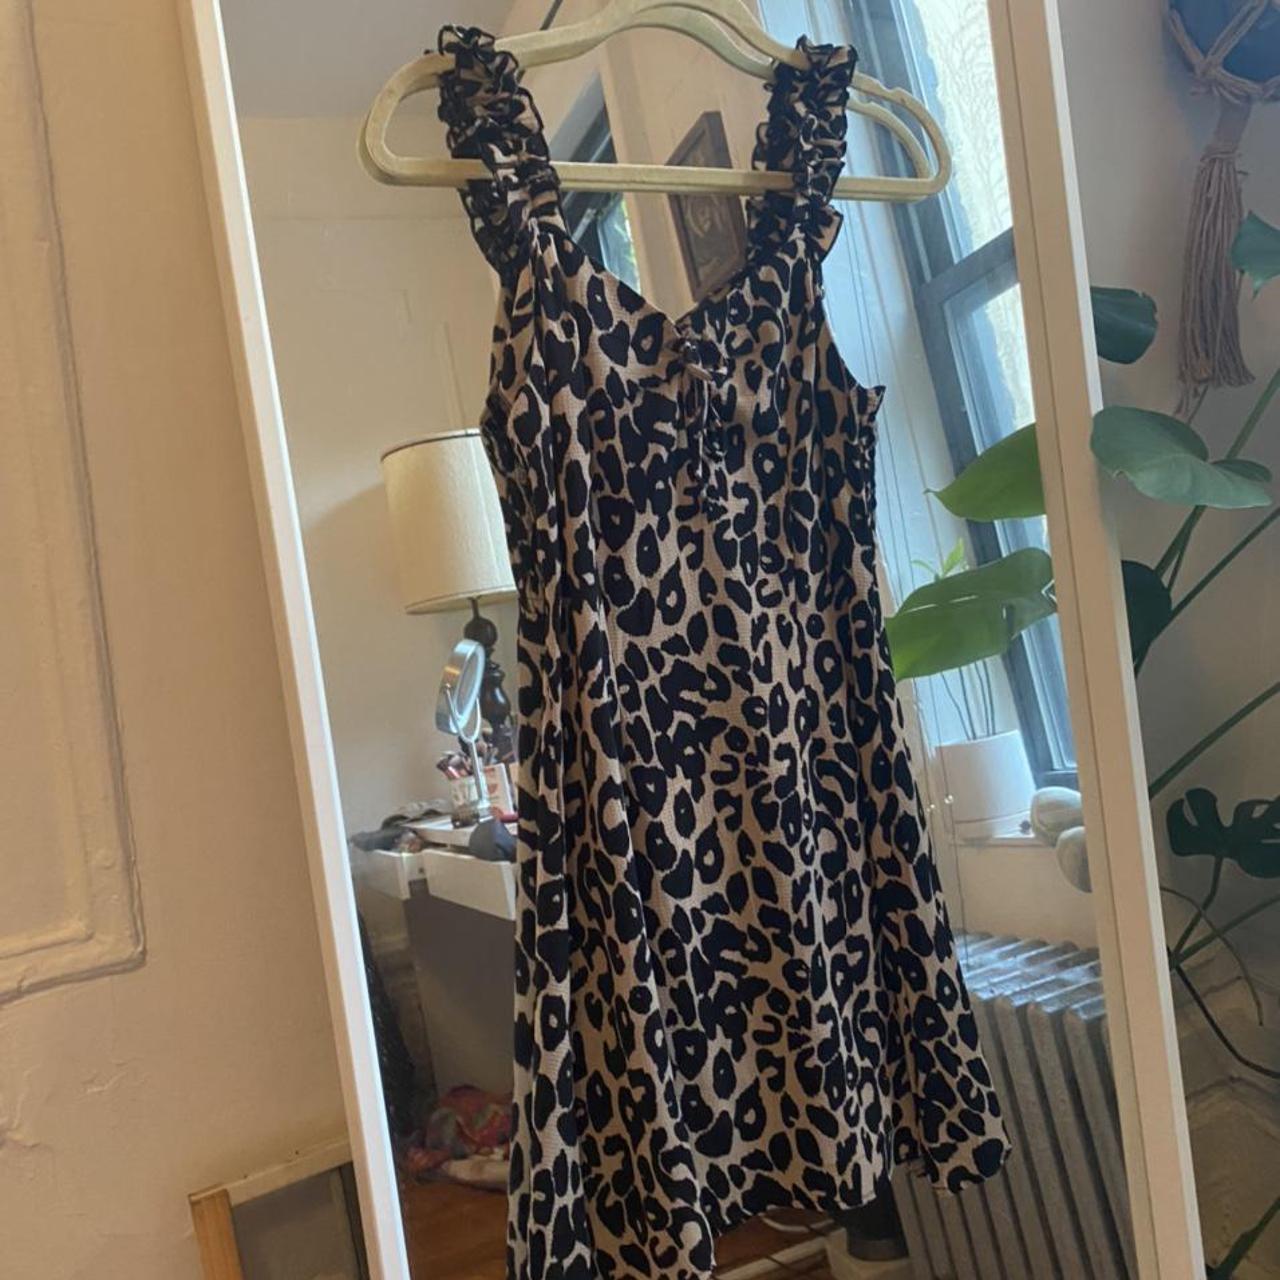 Product Image 1 - Cutest Leopard Mini Dress!
Only worn